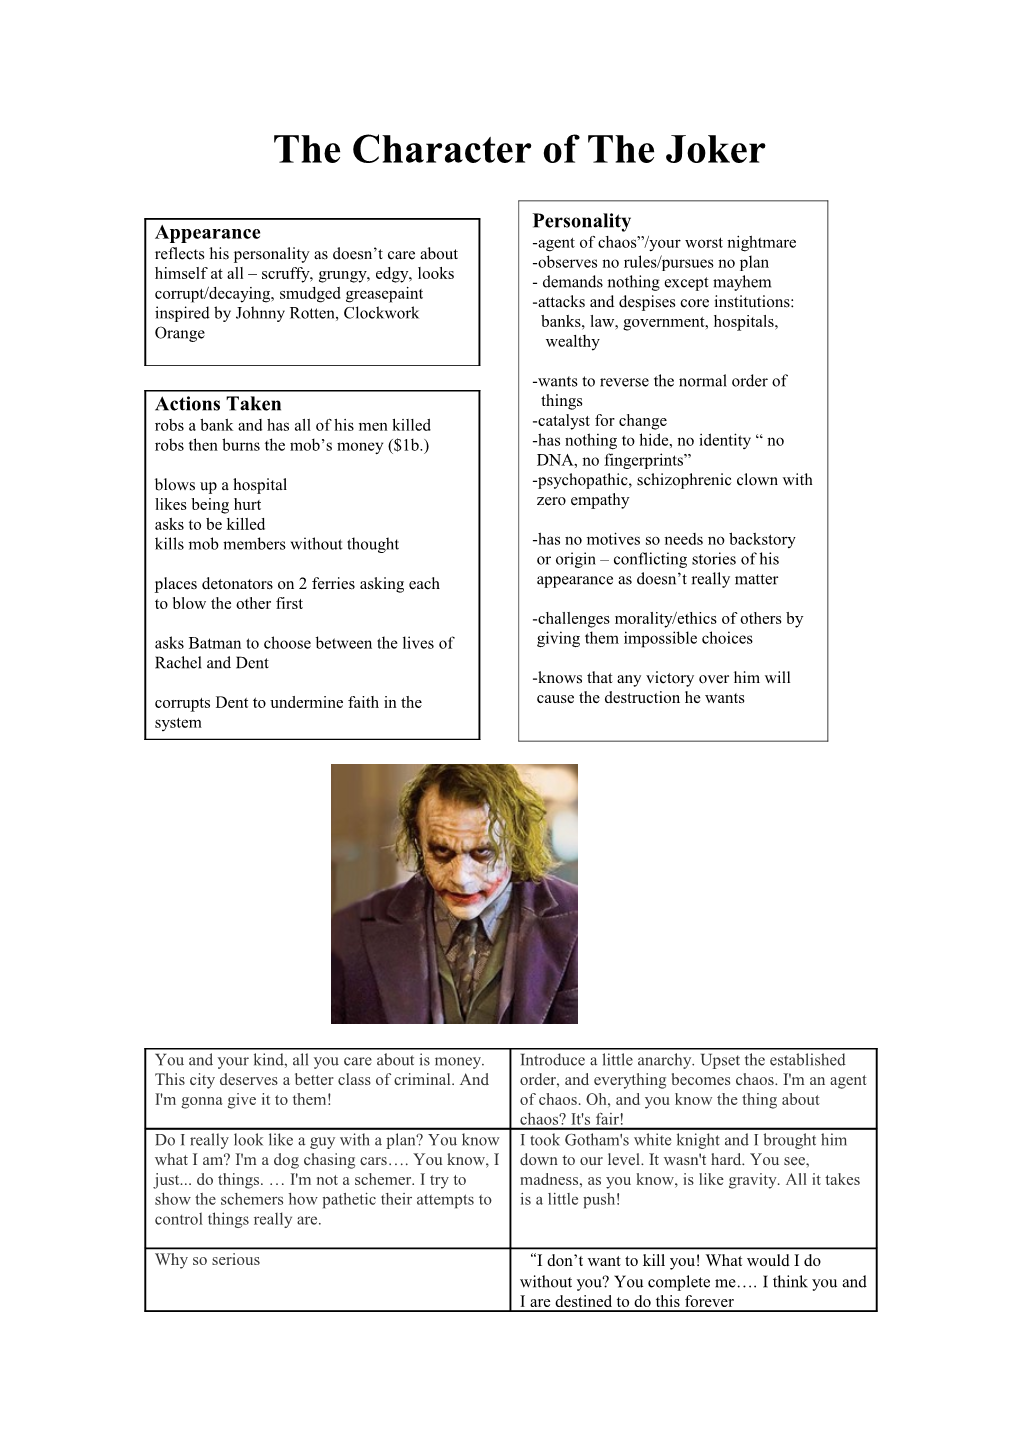 The Character of the Joker